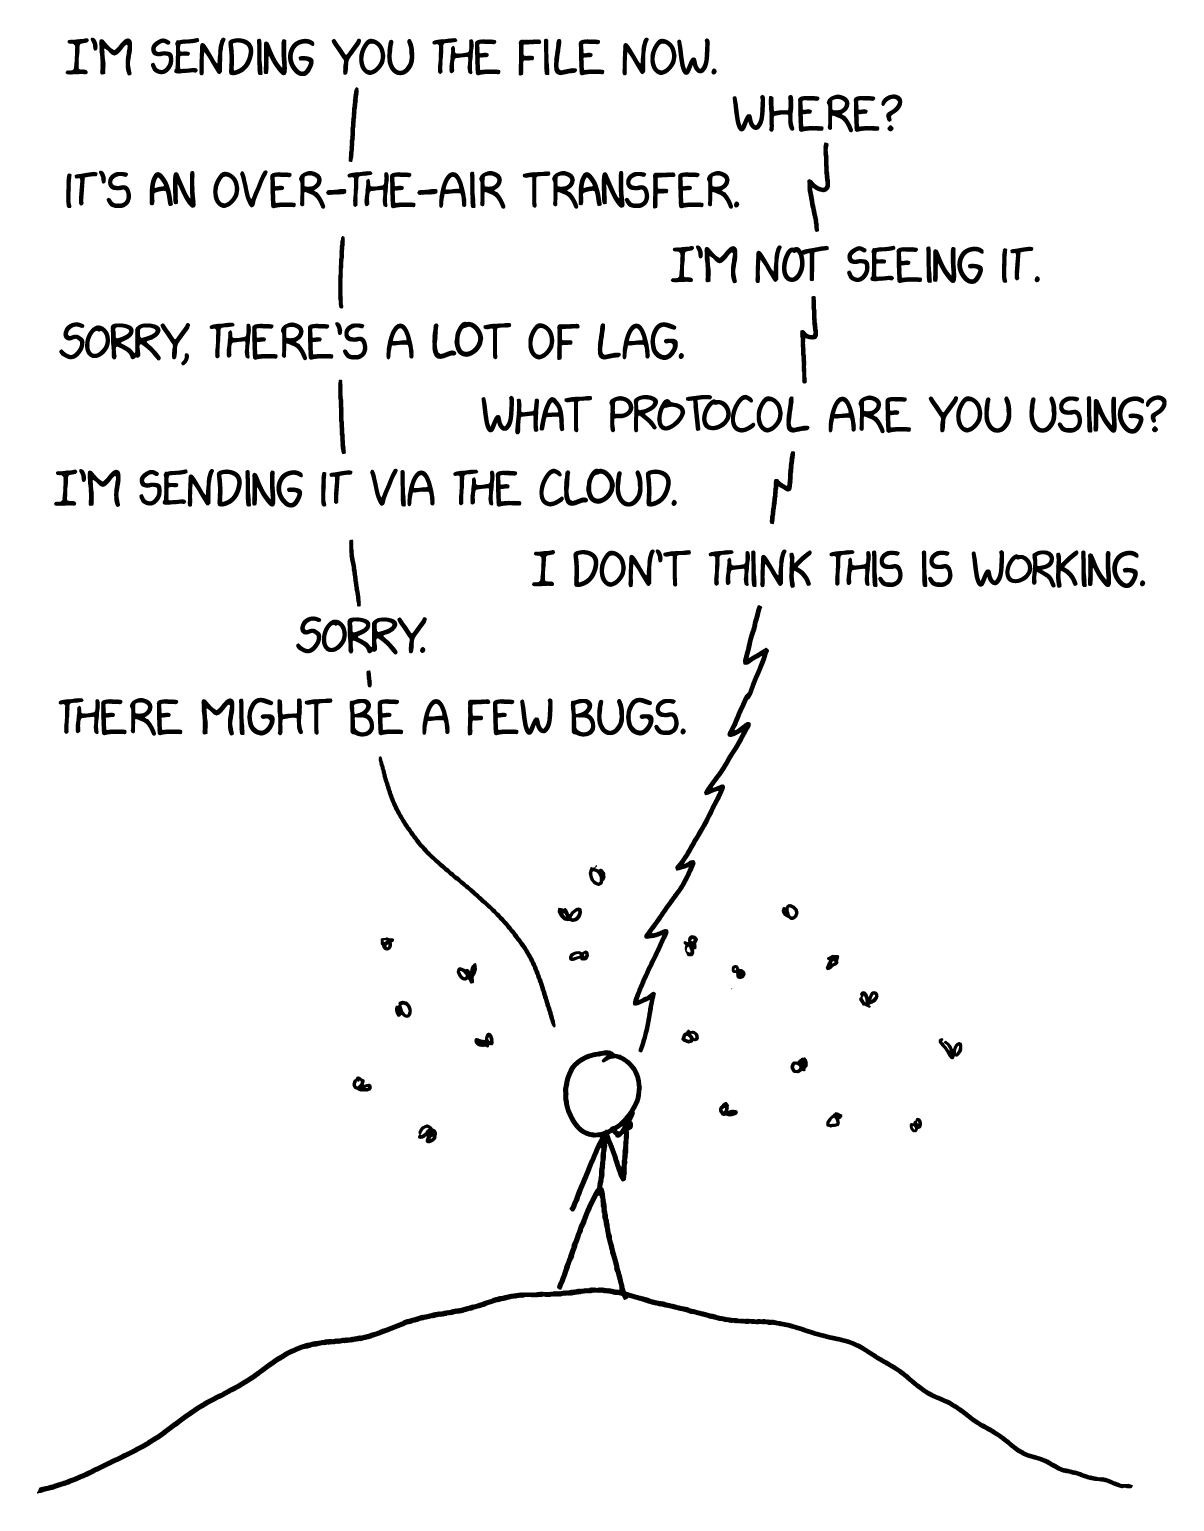 https://blog.xkcd.com/2019/08/26/how-to-send-a-file/